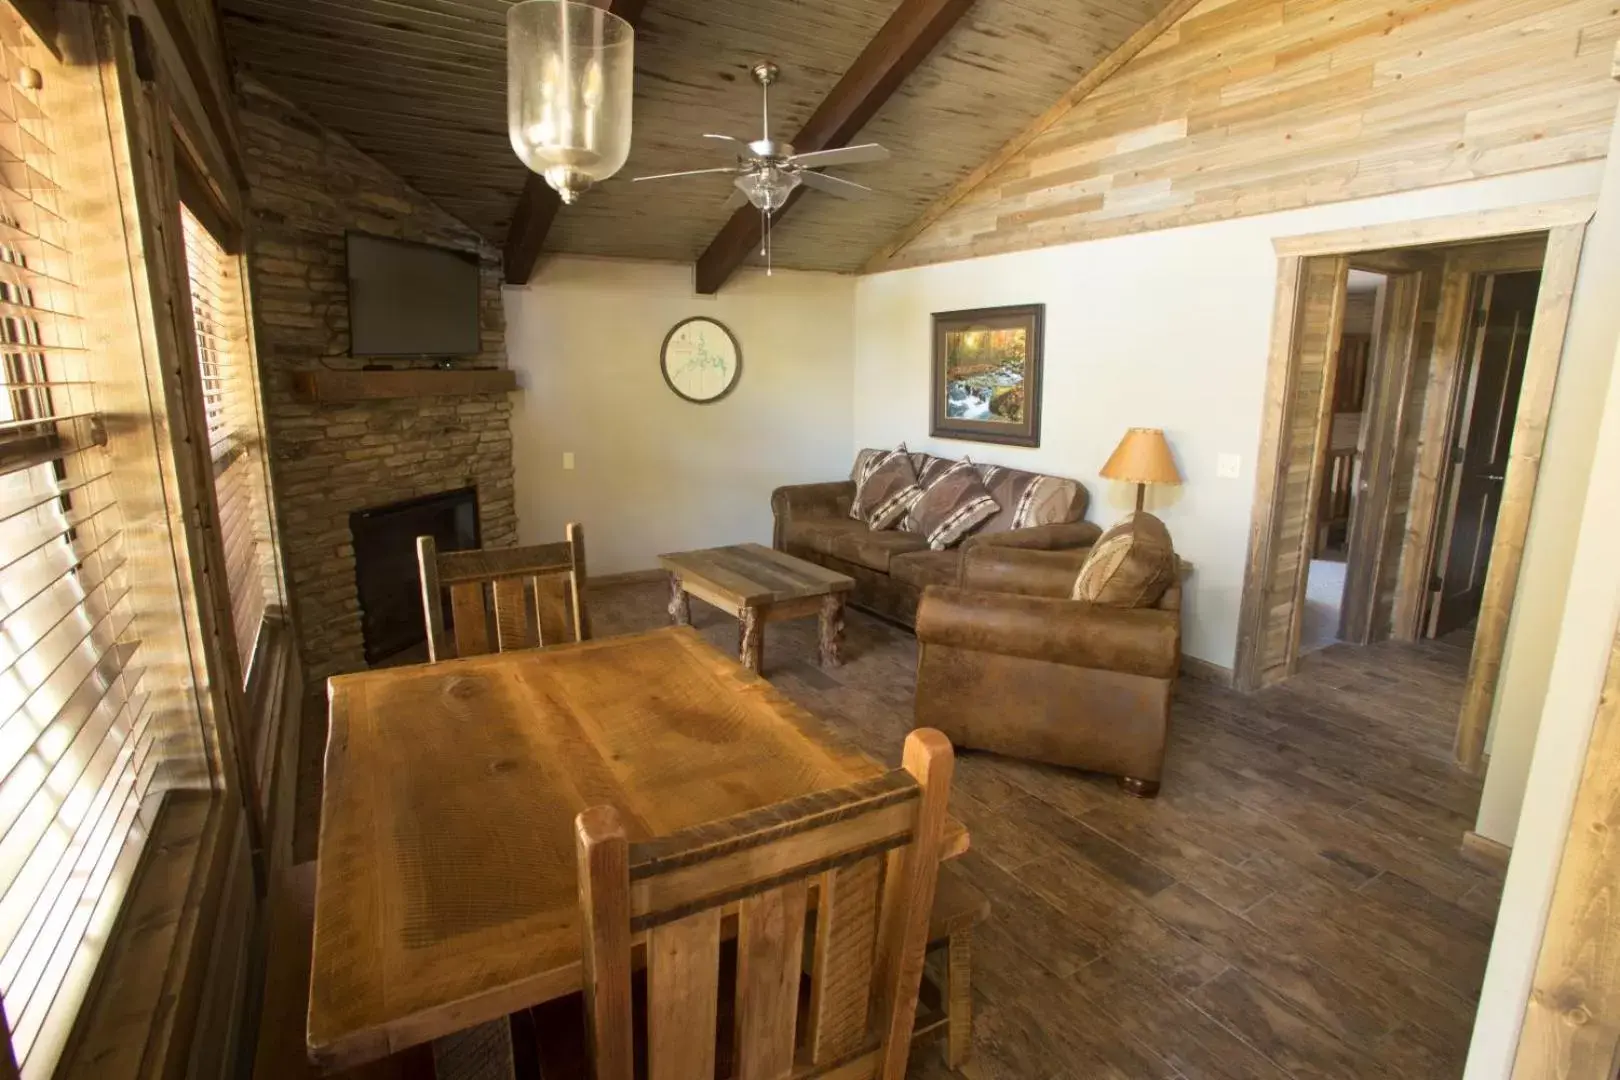 2 Bedroom Lakefront Log Cabin 9 in Table Rock Resorts at Indian Point